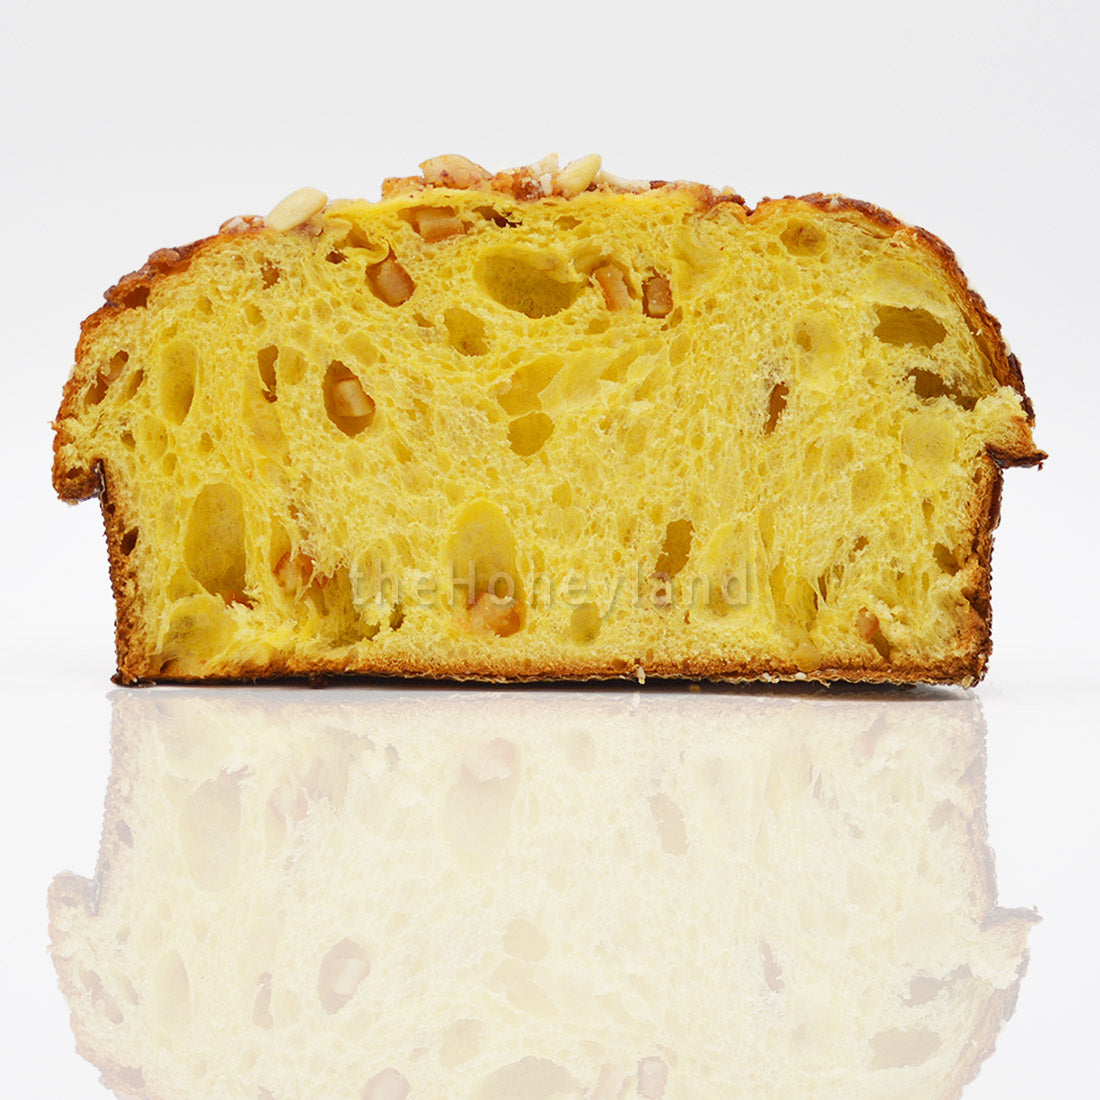 Colomba cake made with Ancient Tuscan Grains